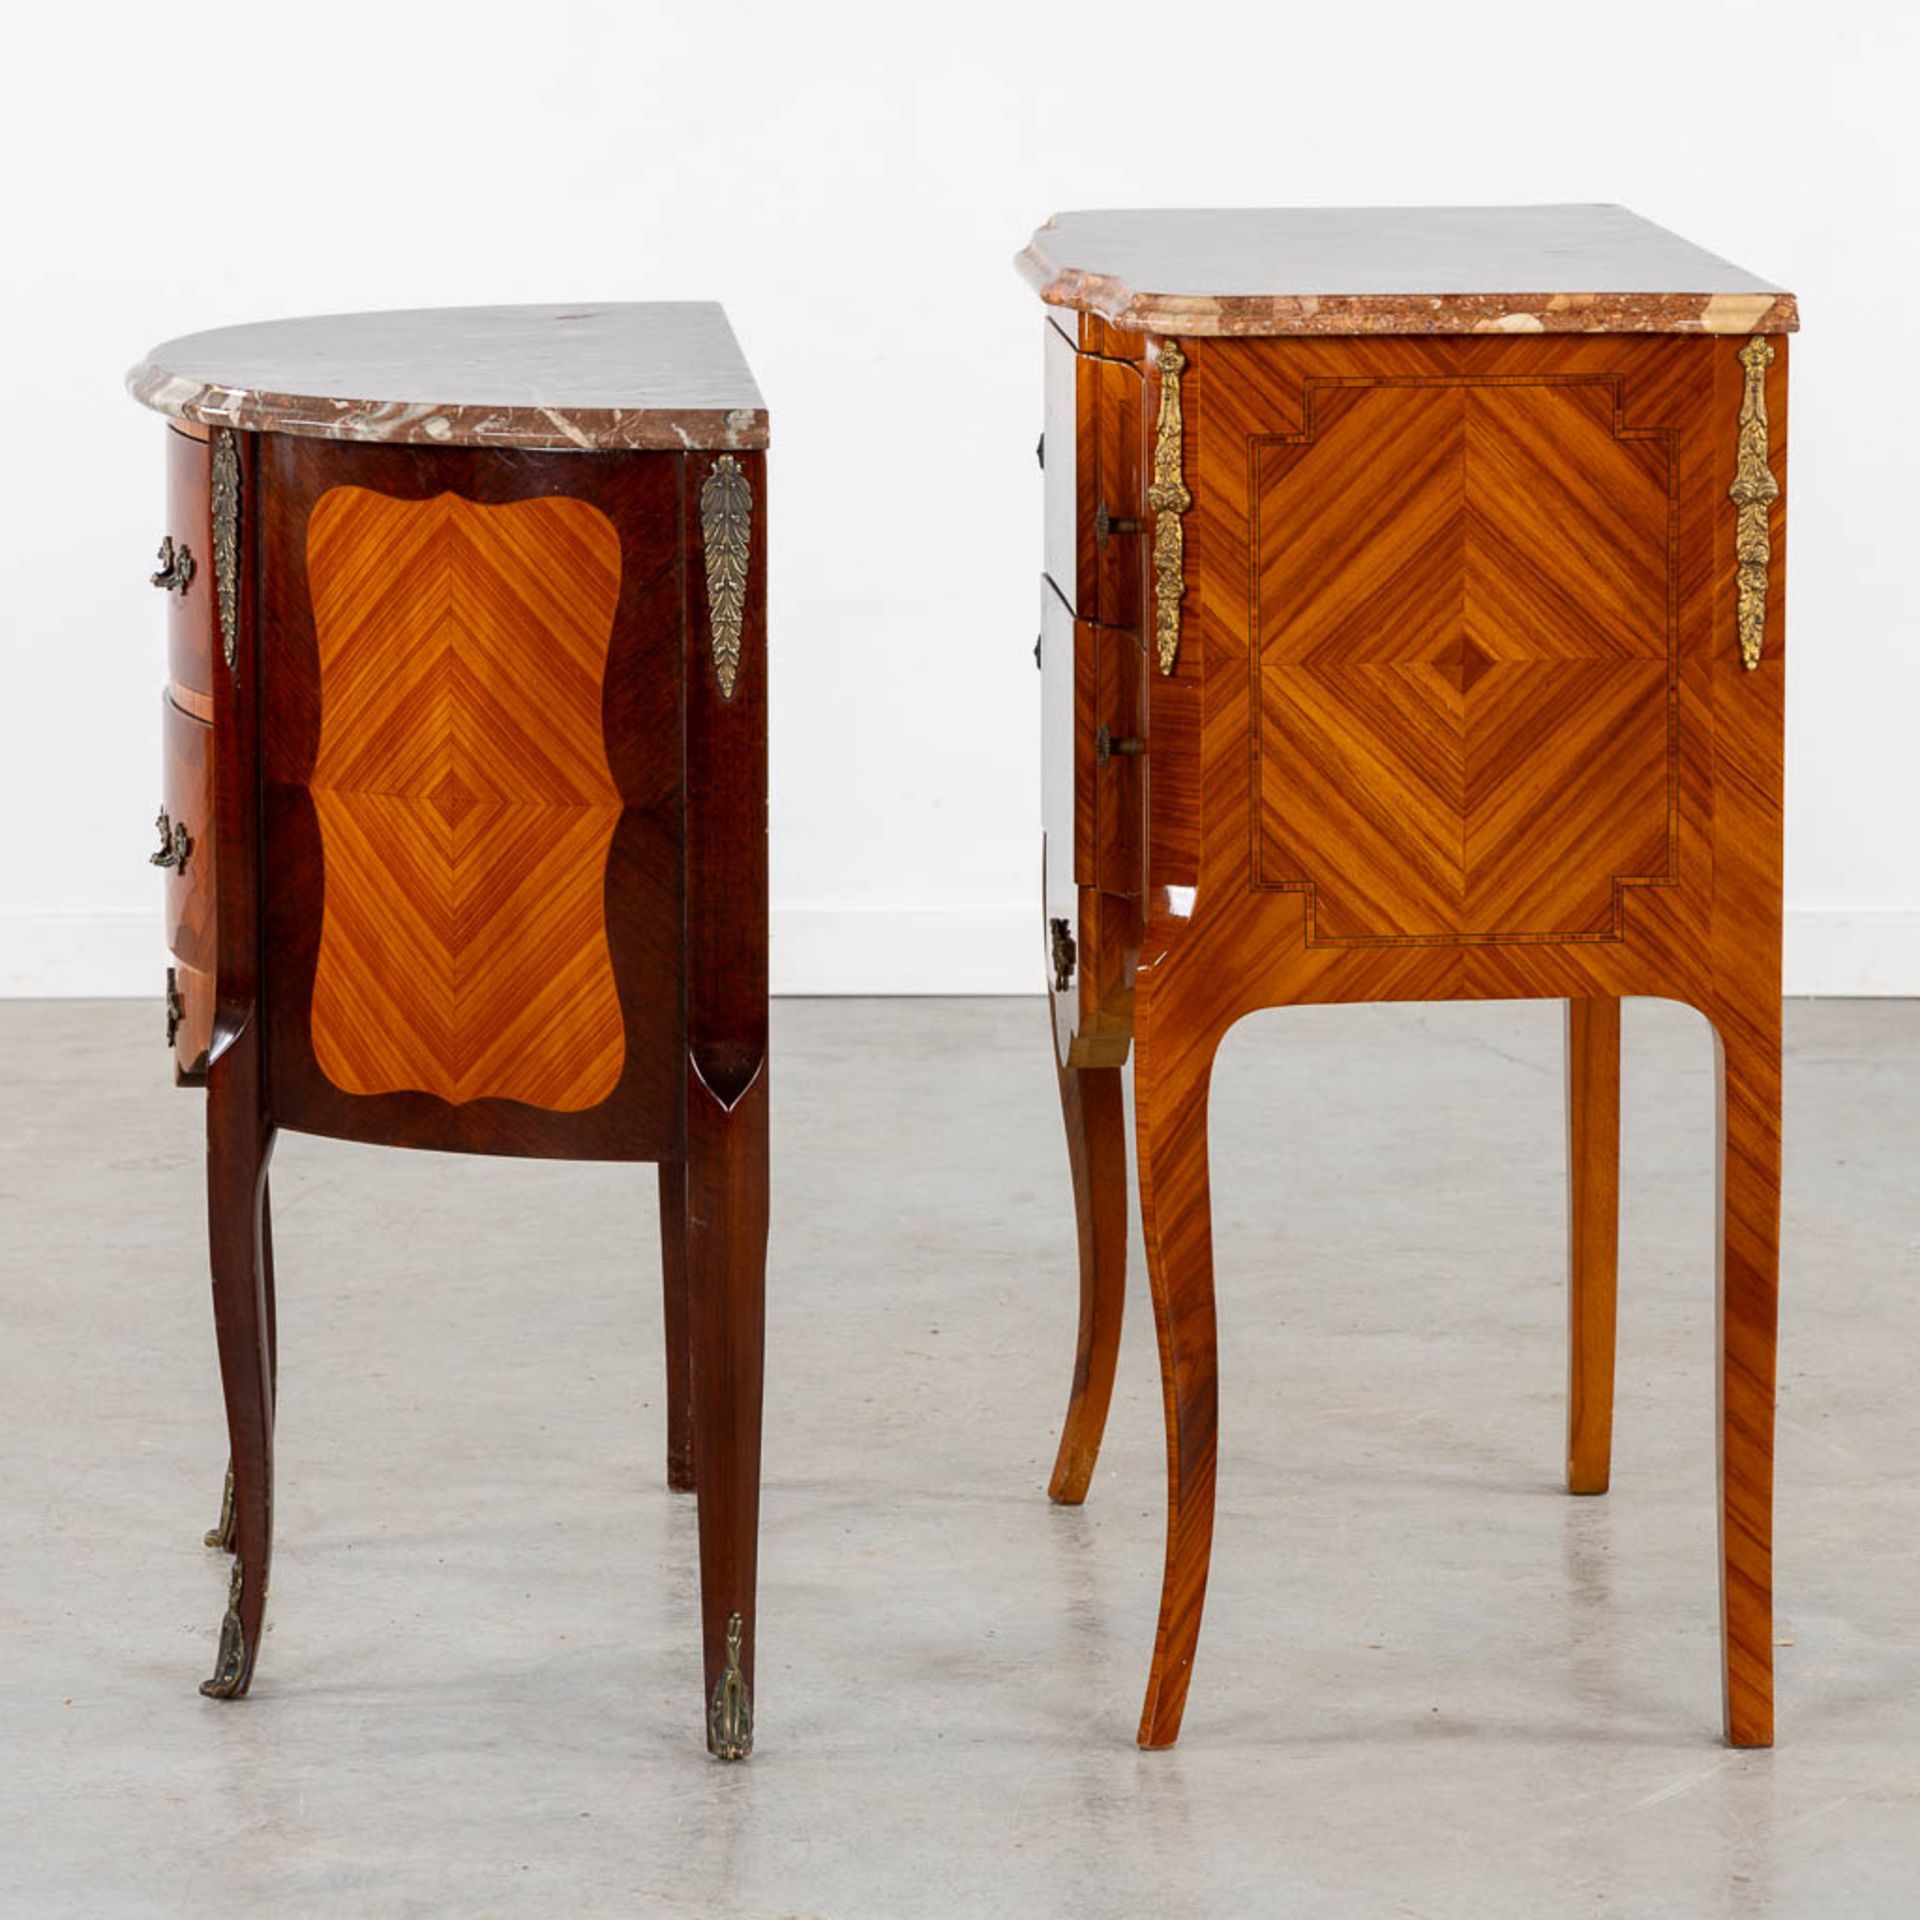 Two small cabinets with drawers, marquetry inlay and a marble top. 20th C. (L:39 x W:70 x H:80 cm) - Bild 5 aus 11